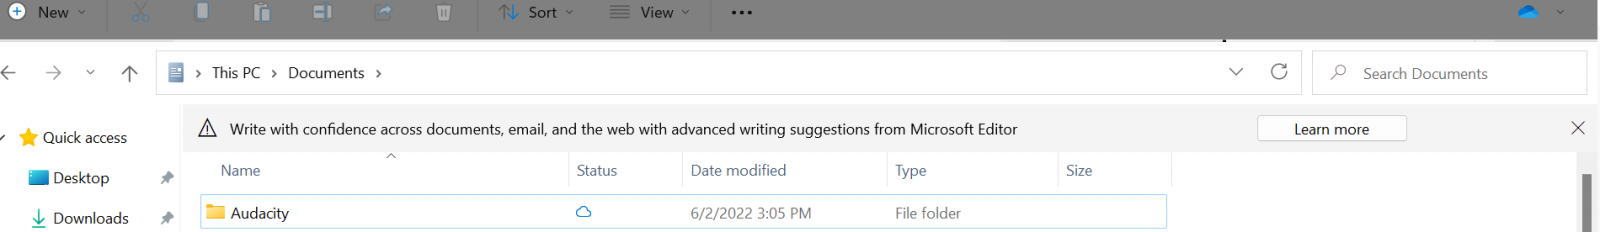 A screenshot of Windows Explorer. Above the list of files, an important-looking banner with a triangle exclamation mark alert symbol reads "Write with confidence across documents, email, and the web with advanced writing suggestions from Microsoft Editor".